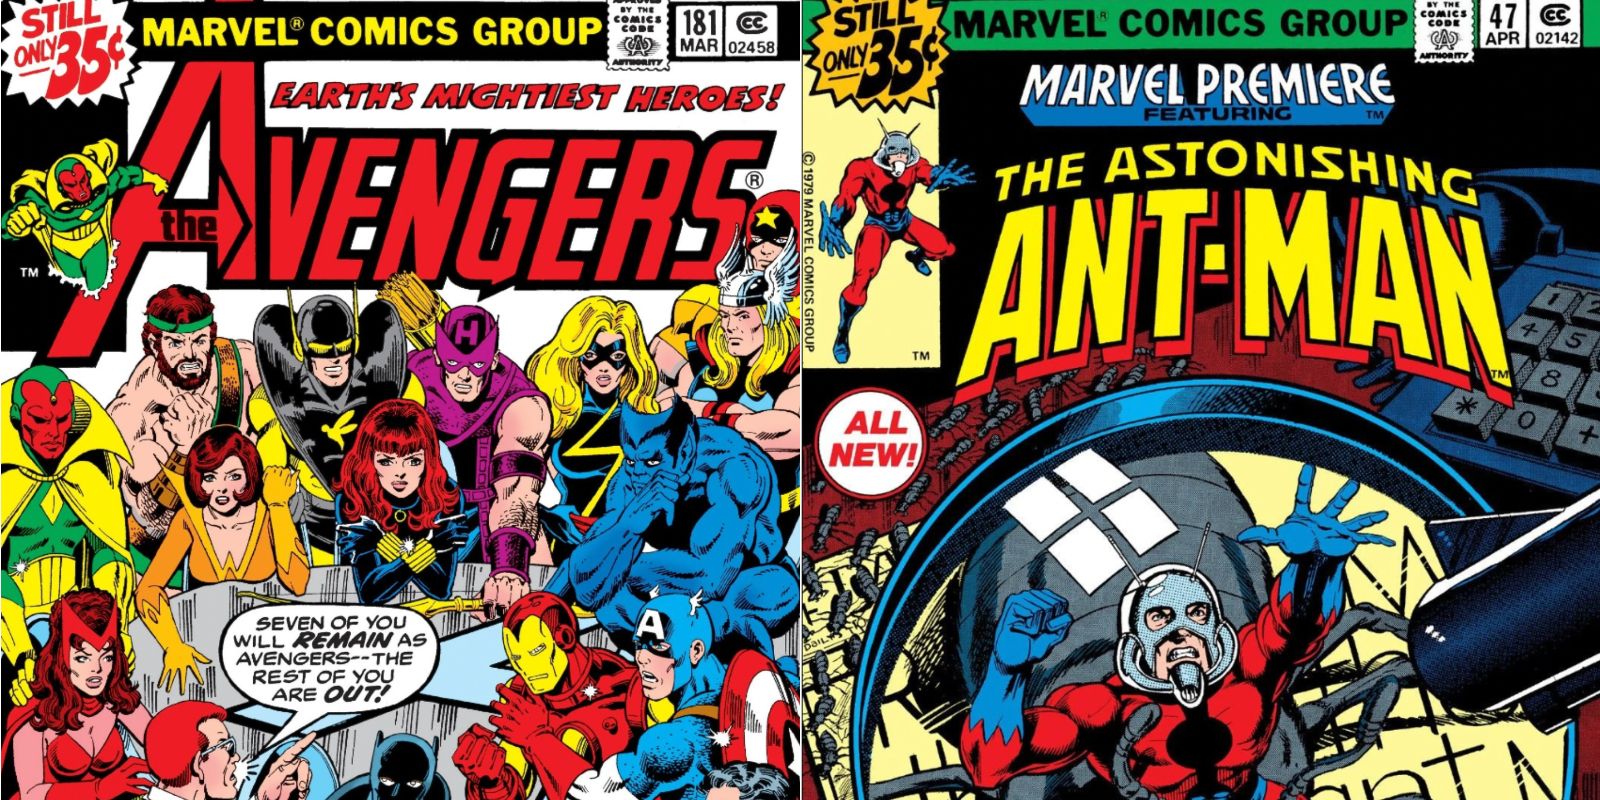 A split image features the comic book covers of Avengers 181 and Marvel Premiere 47